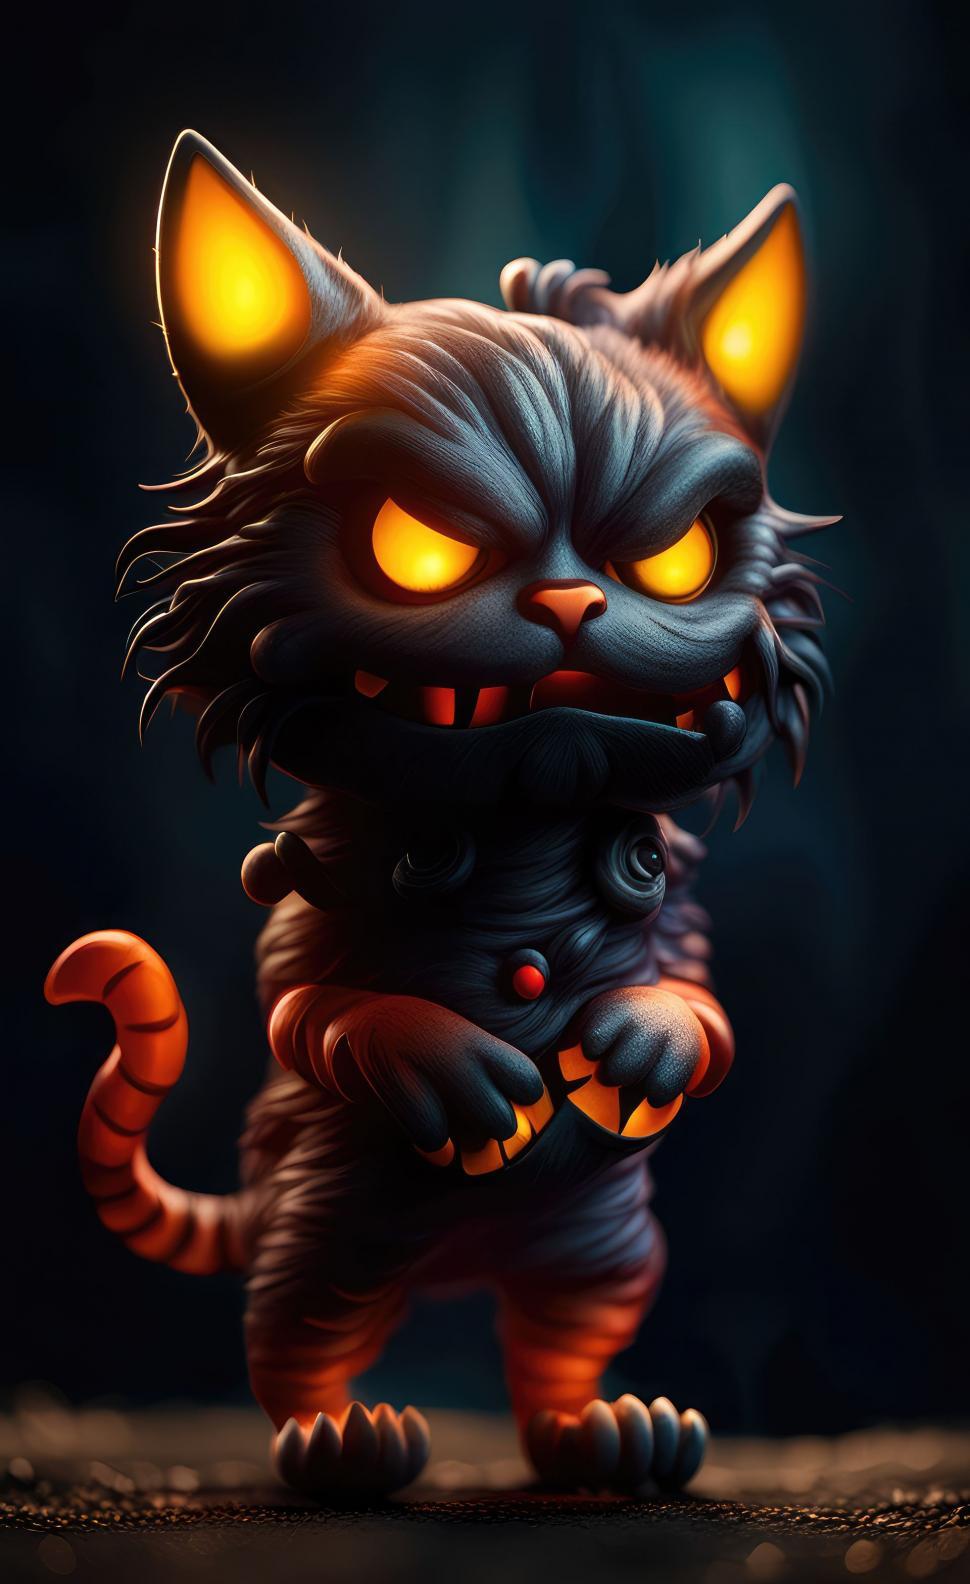 Free Image of Spooky halloween monster poster illustration Crazy spooky halloween cat monster 